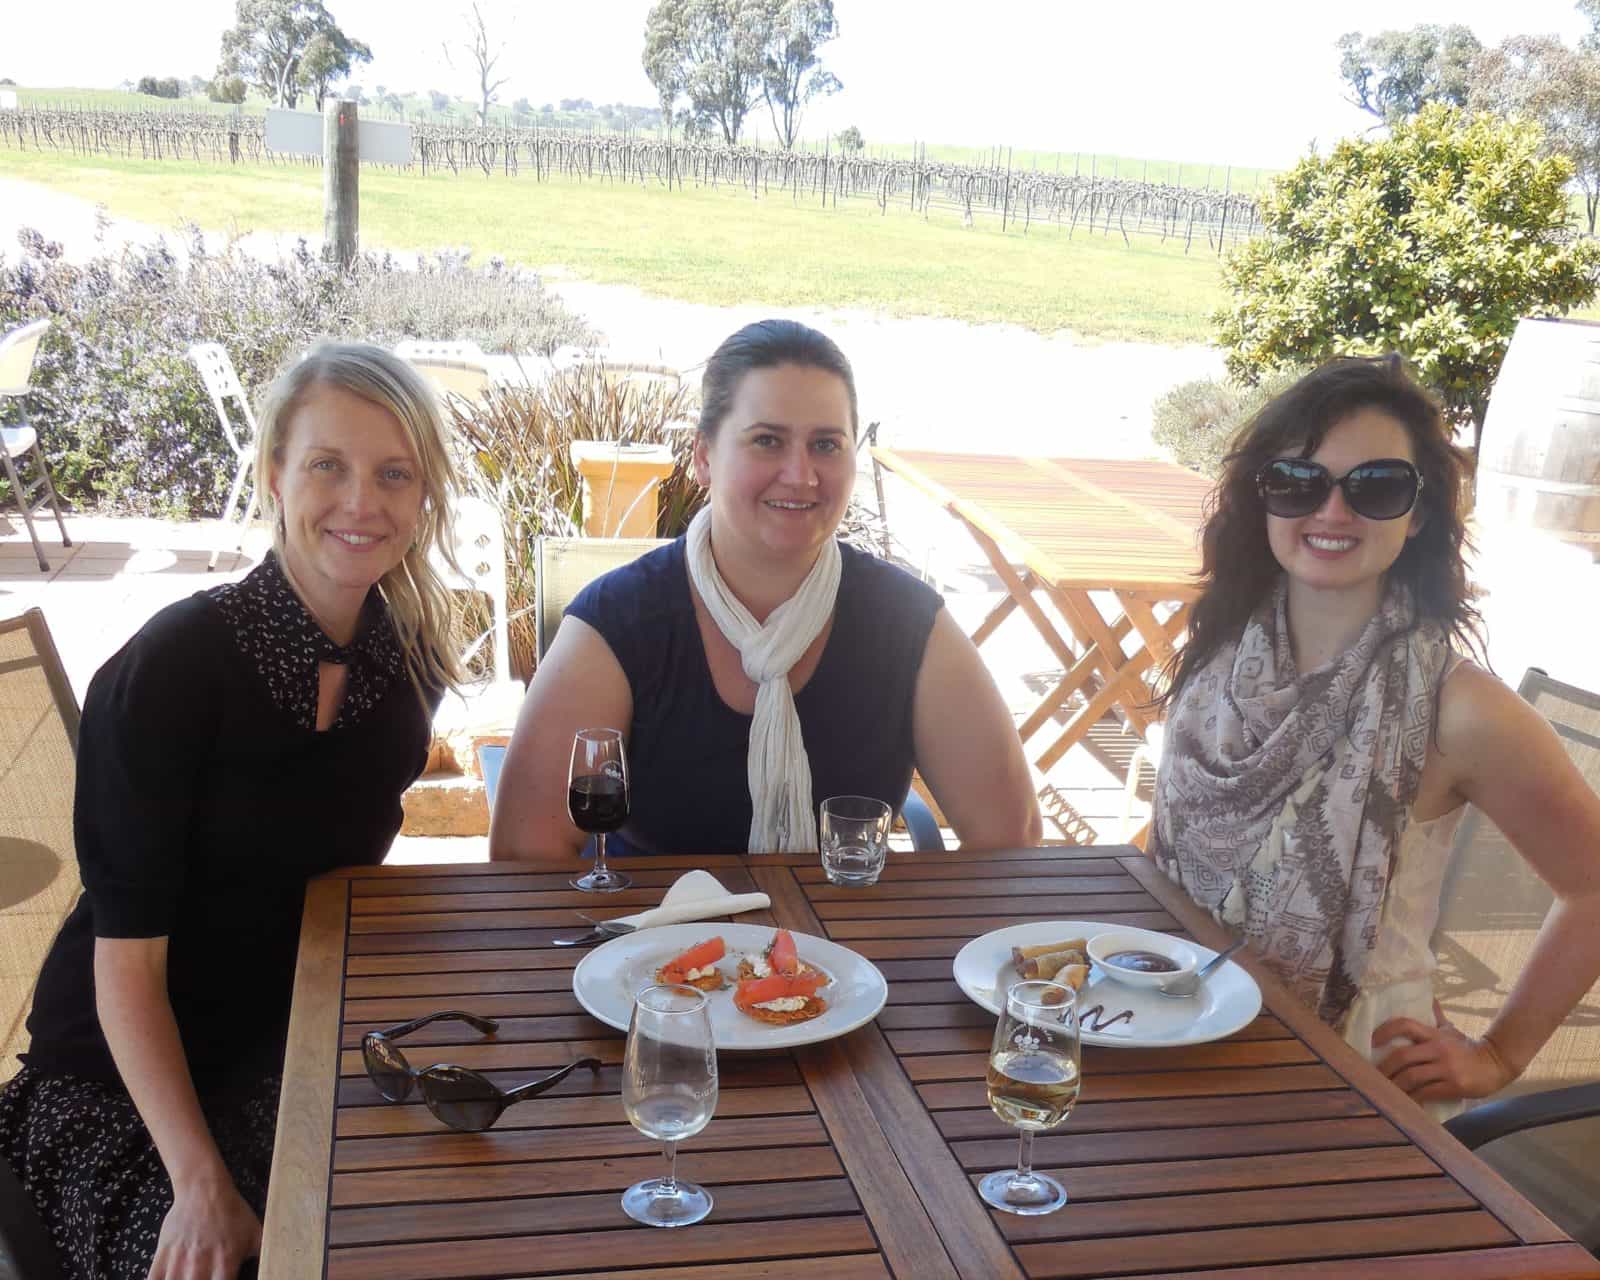 Guests enjoy cheeses and wines made at Gallagher Wines